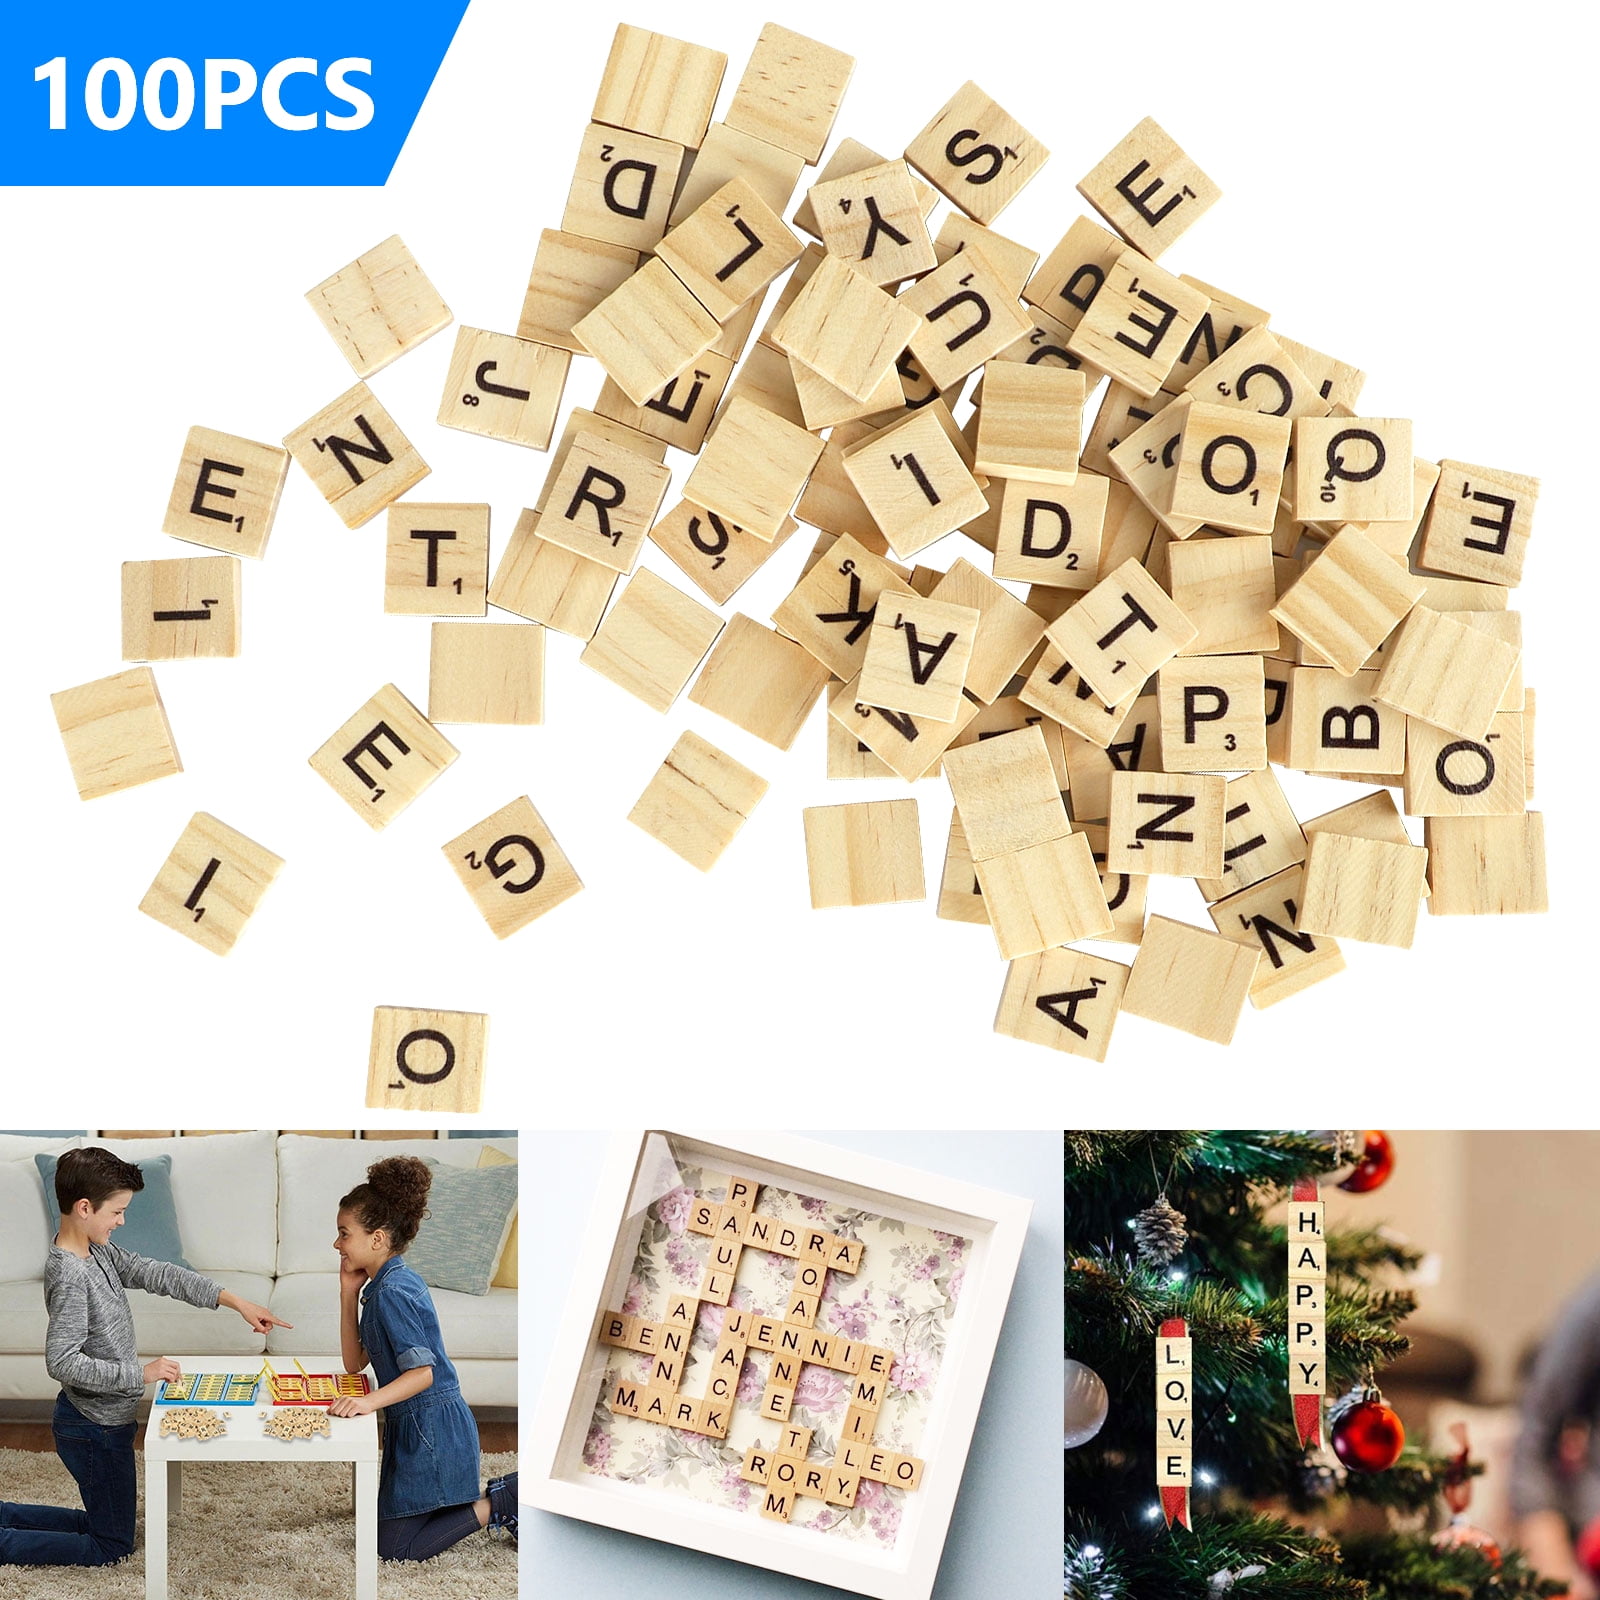 Wooden SCRABBLE Customize Choice Tiles Letters Number 5,10,20 Wholesale Price UK 